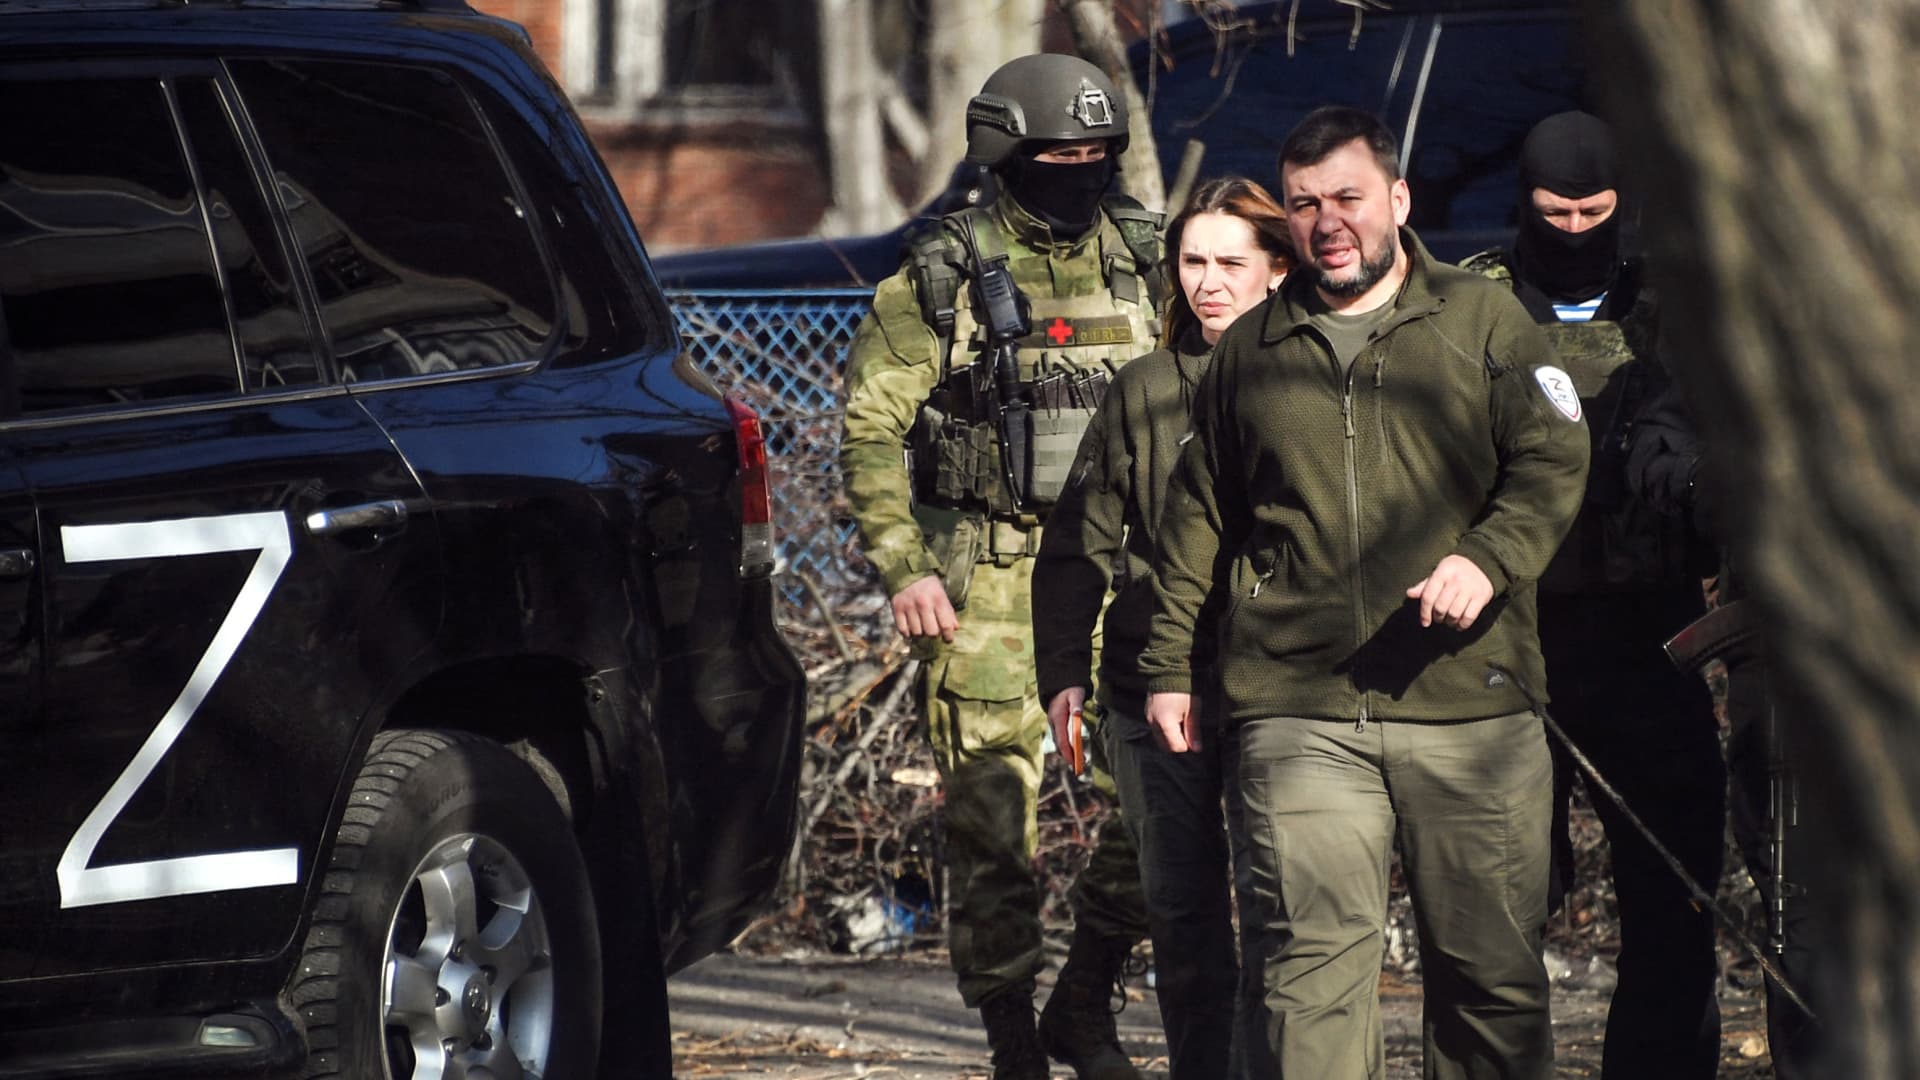 Denis Pushilin (C), leader of the separatists in the self-proclaimed Donetsk People's Republic (DNR) arrives to deliver a press conference in Donetsk, on April 11, 2022.